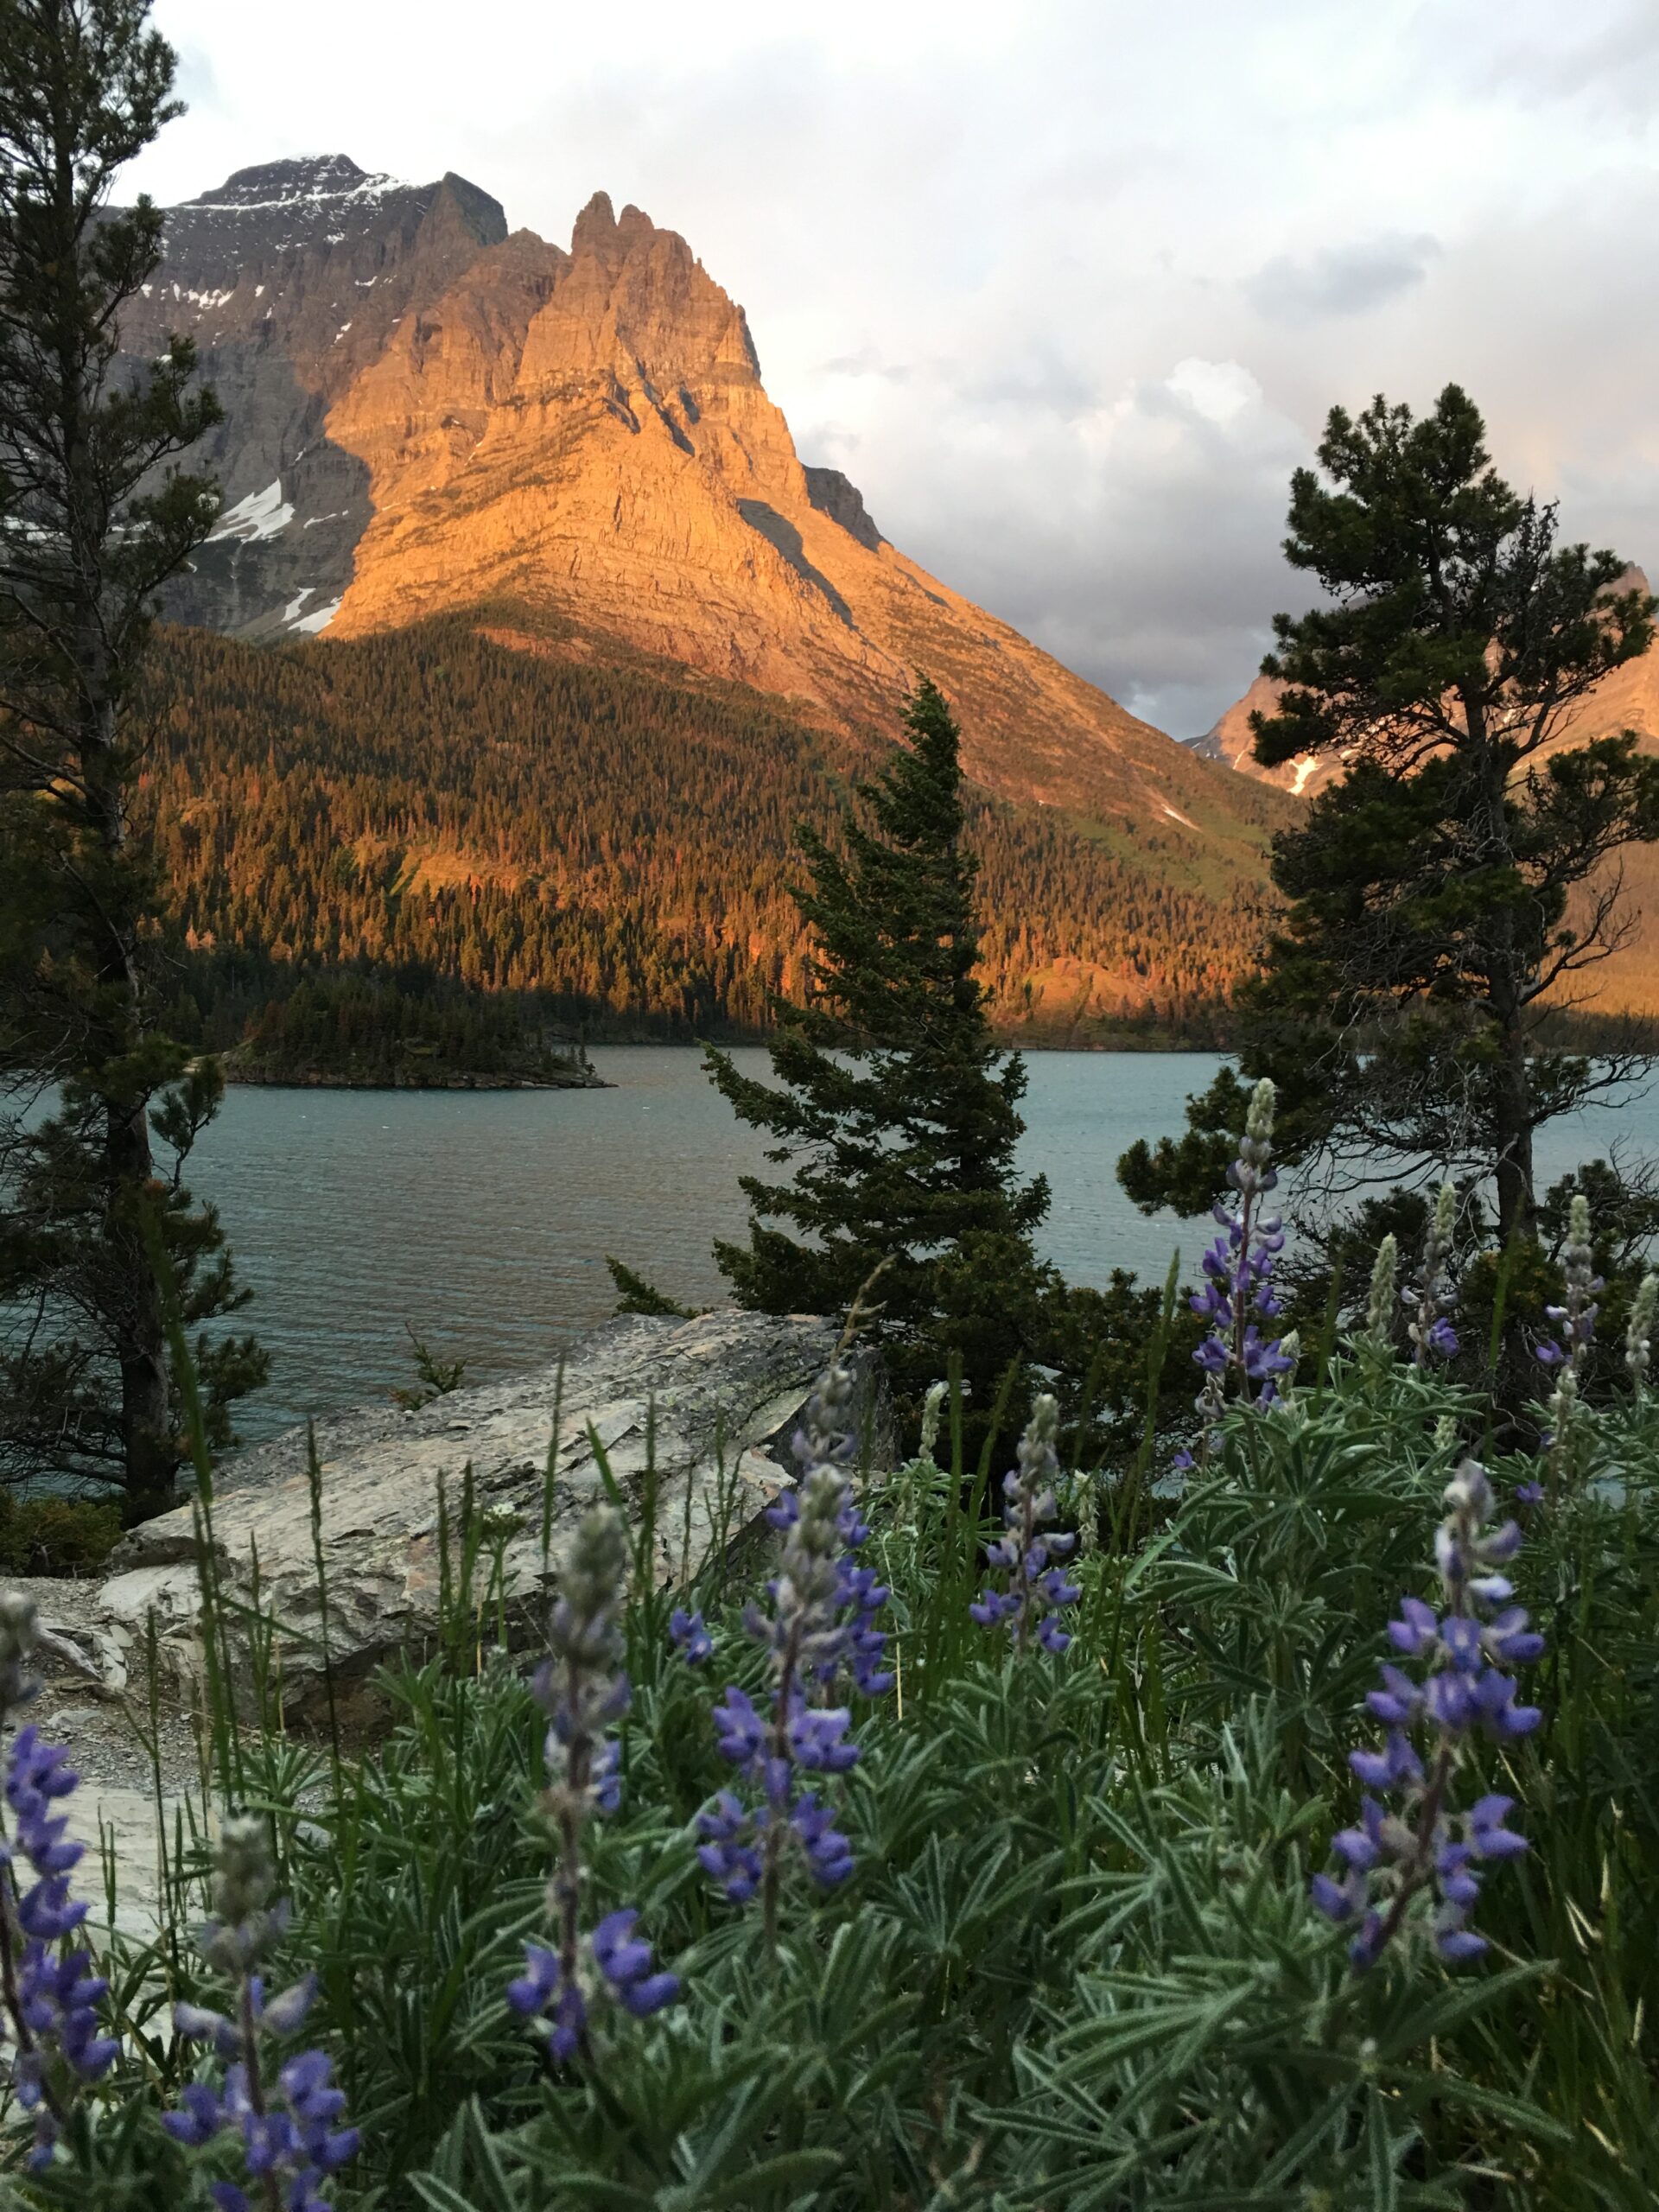 image shows a glowing mountain at a lake with flowers and foliage in the foreground